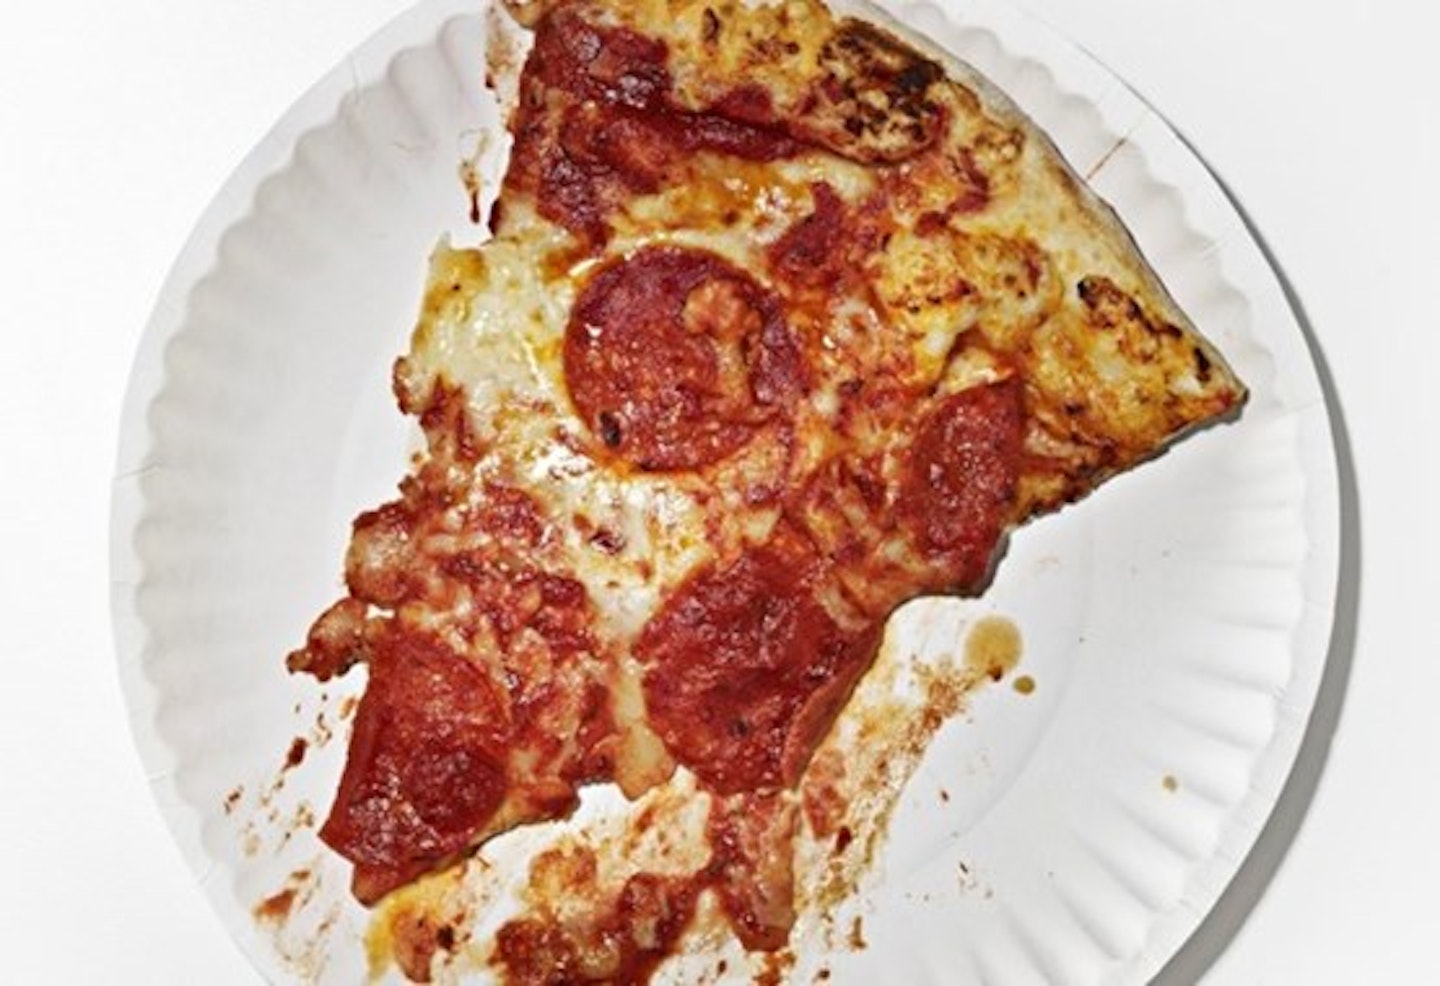 An image of a slice of pizza